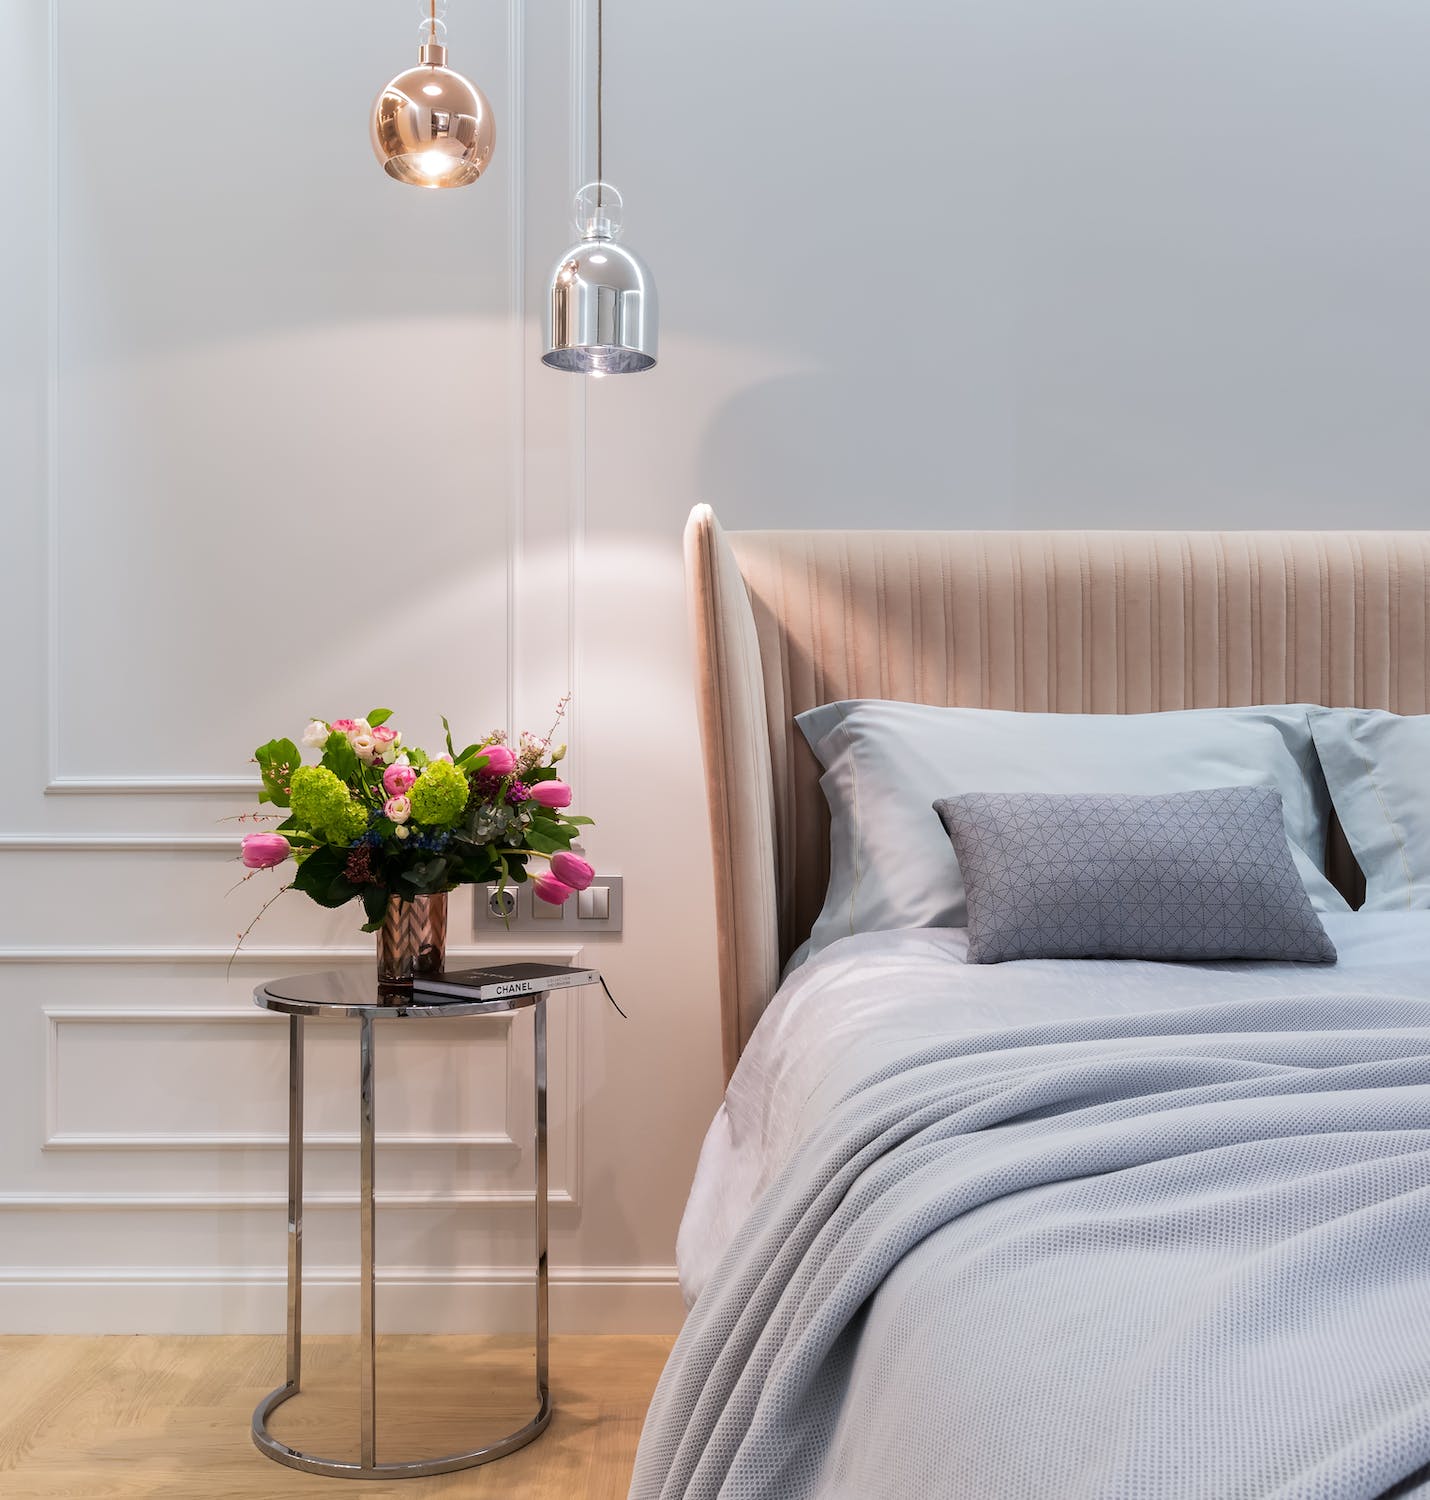 Illuminate Your Space: Tips for Choosing Bedroom Lighting